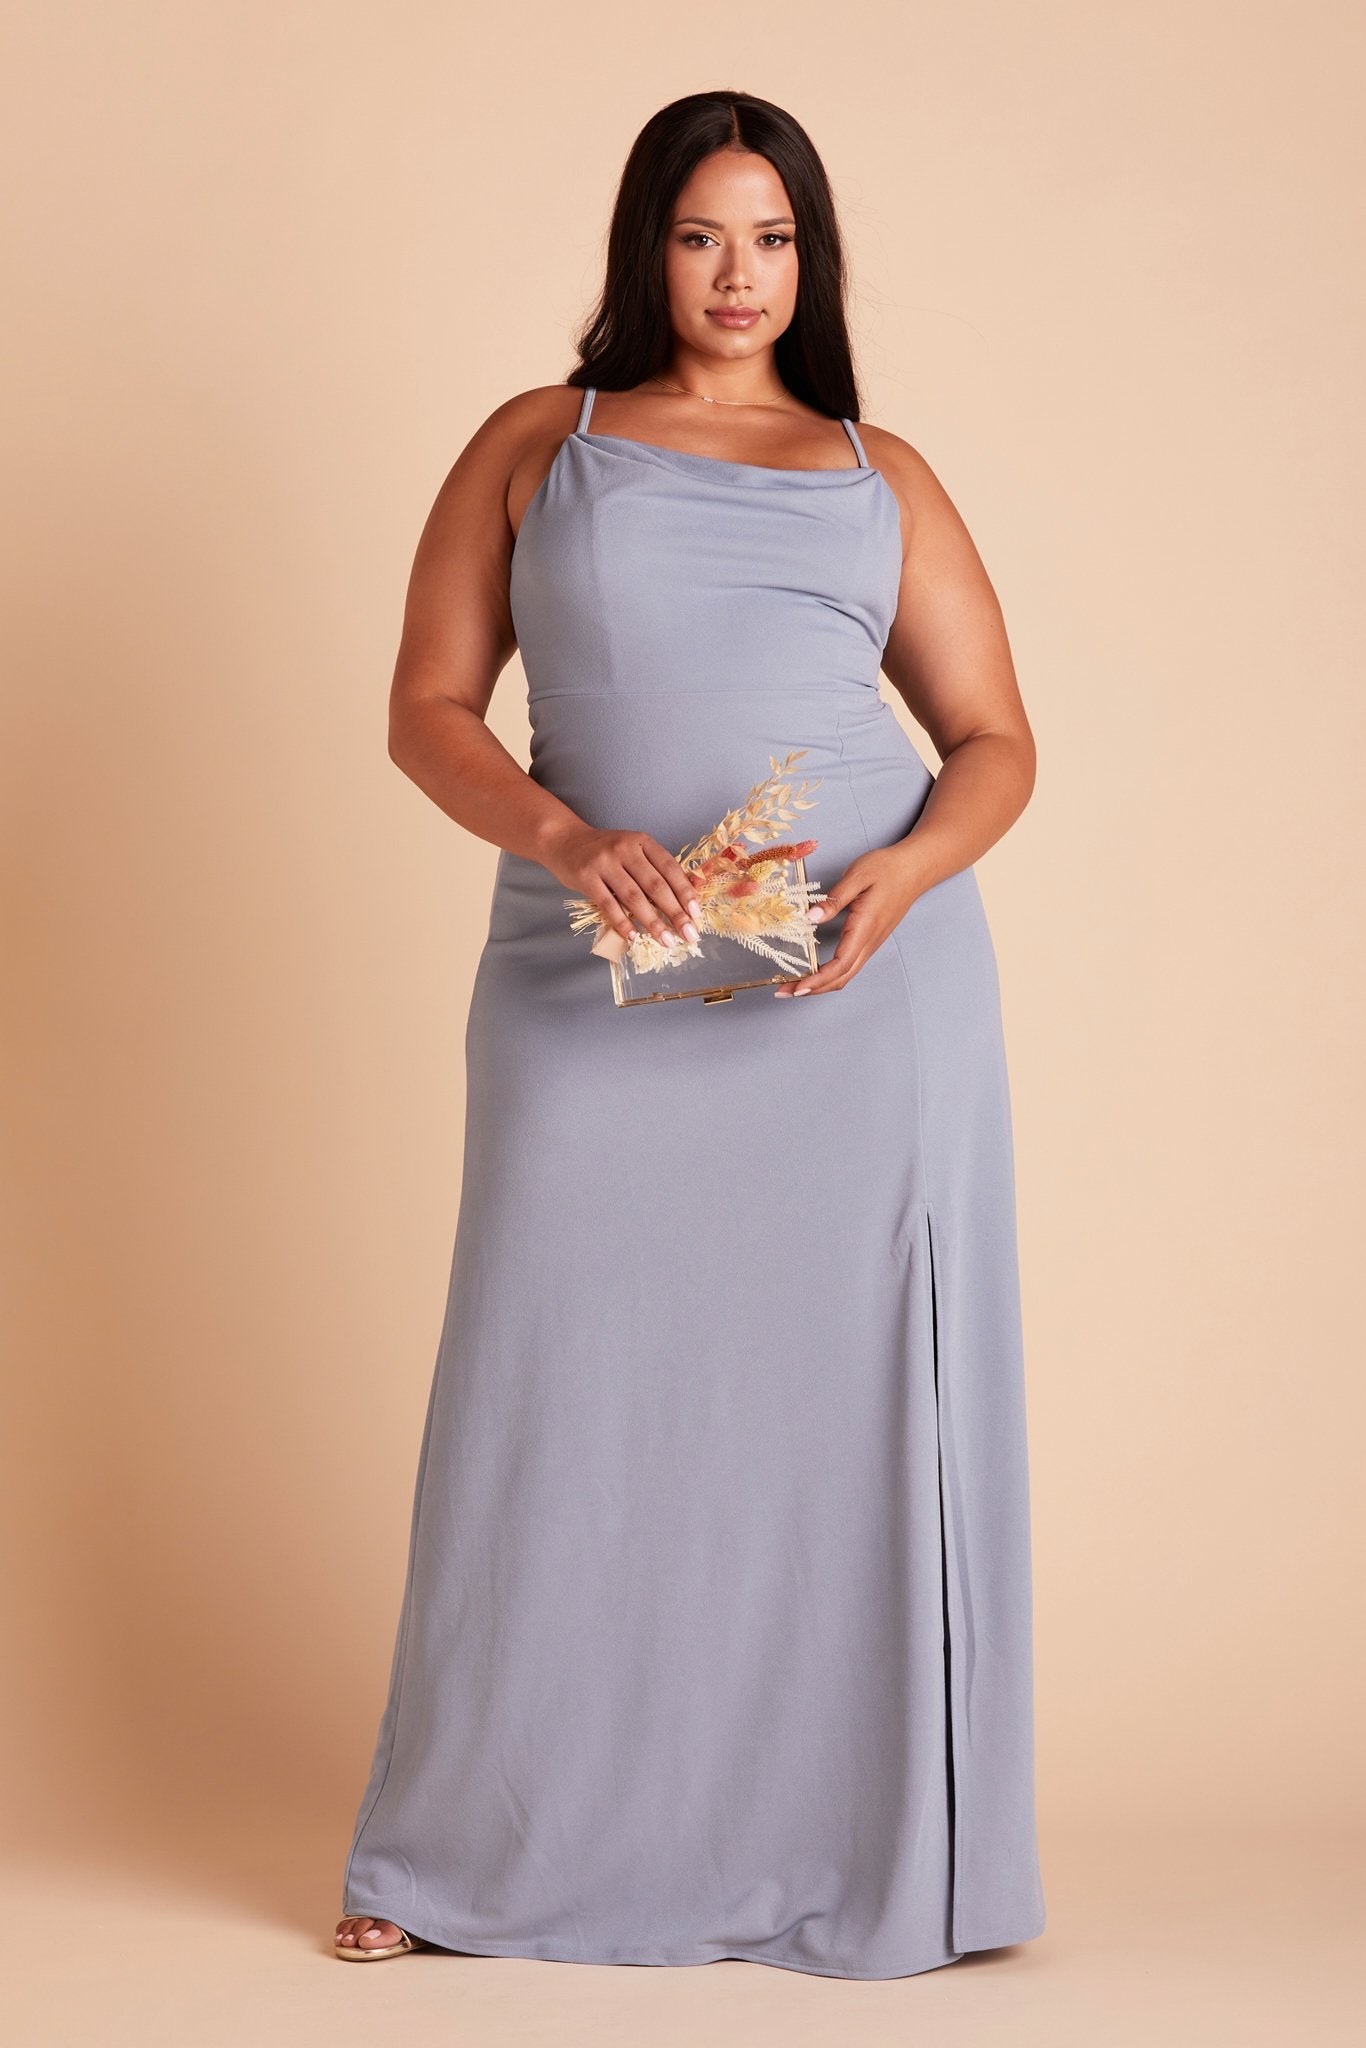 Front view of the floor-length Ash Plus Size Bridesmaid Dress in dusty blue crepe worn by a curvy model with medium-tone skin.